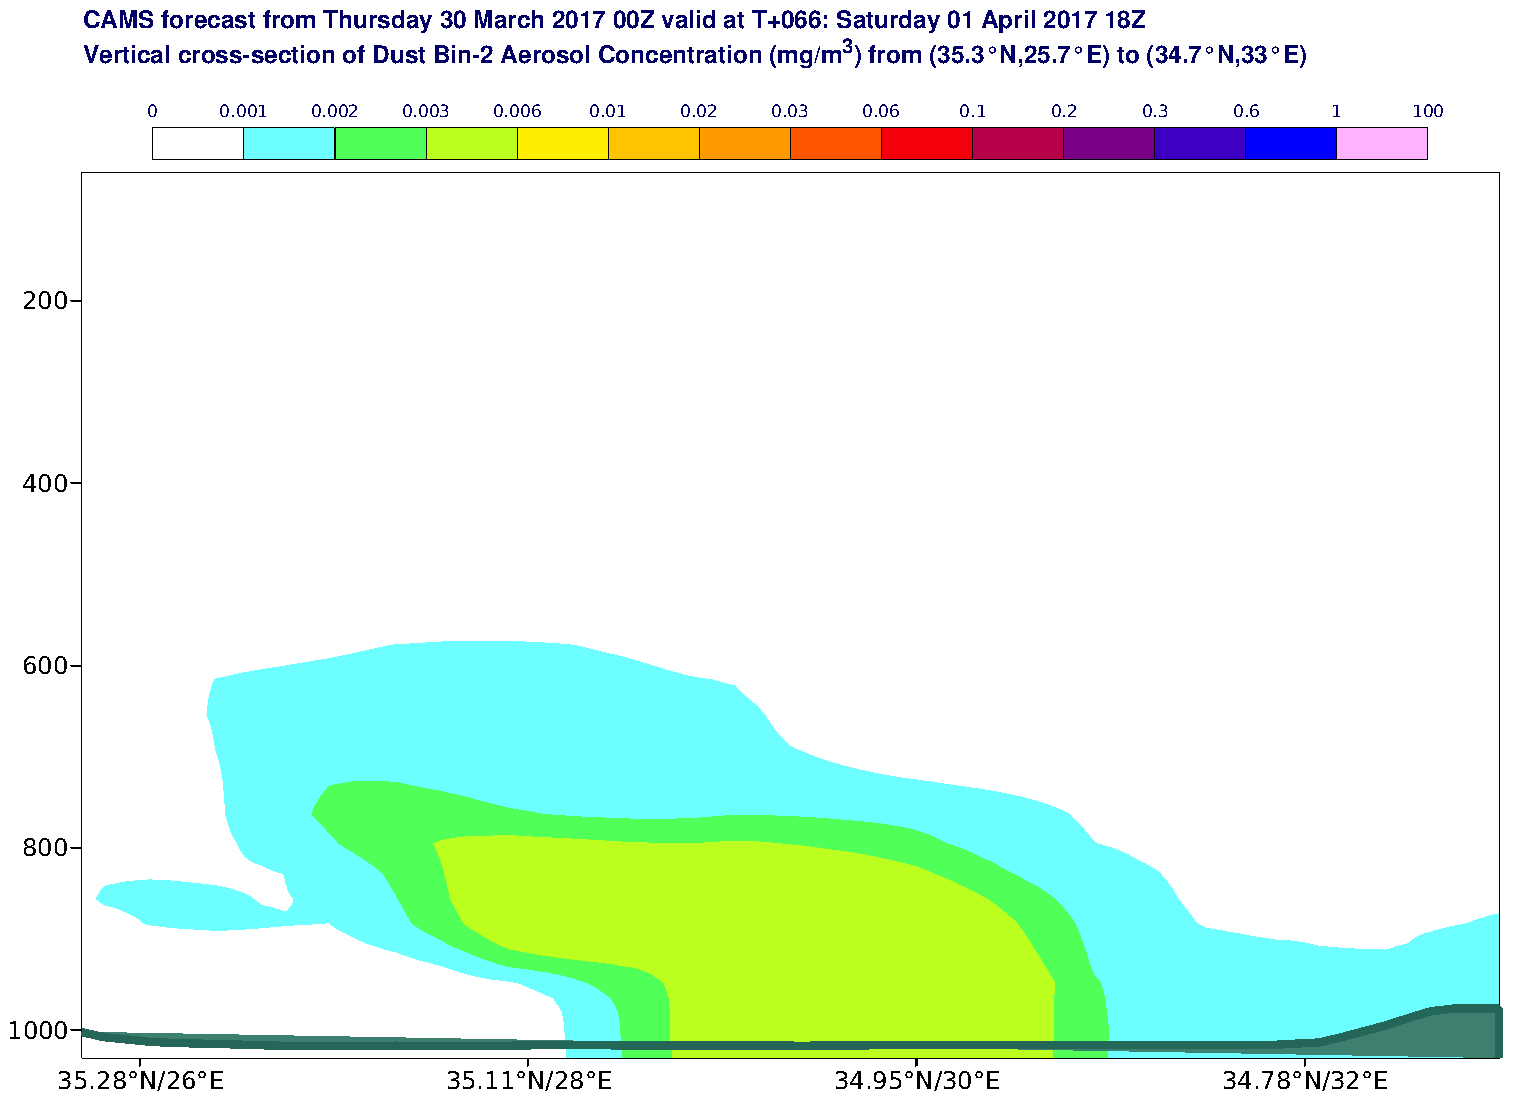 Vertical cross-section of Dust Bin-2 Aerosol Concentration (mg/m3) valid at T66 - 2017-04-01 18:00